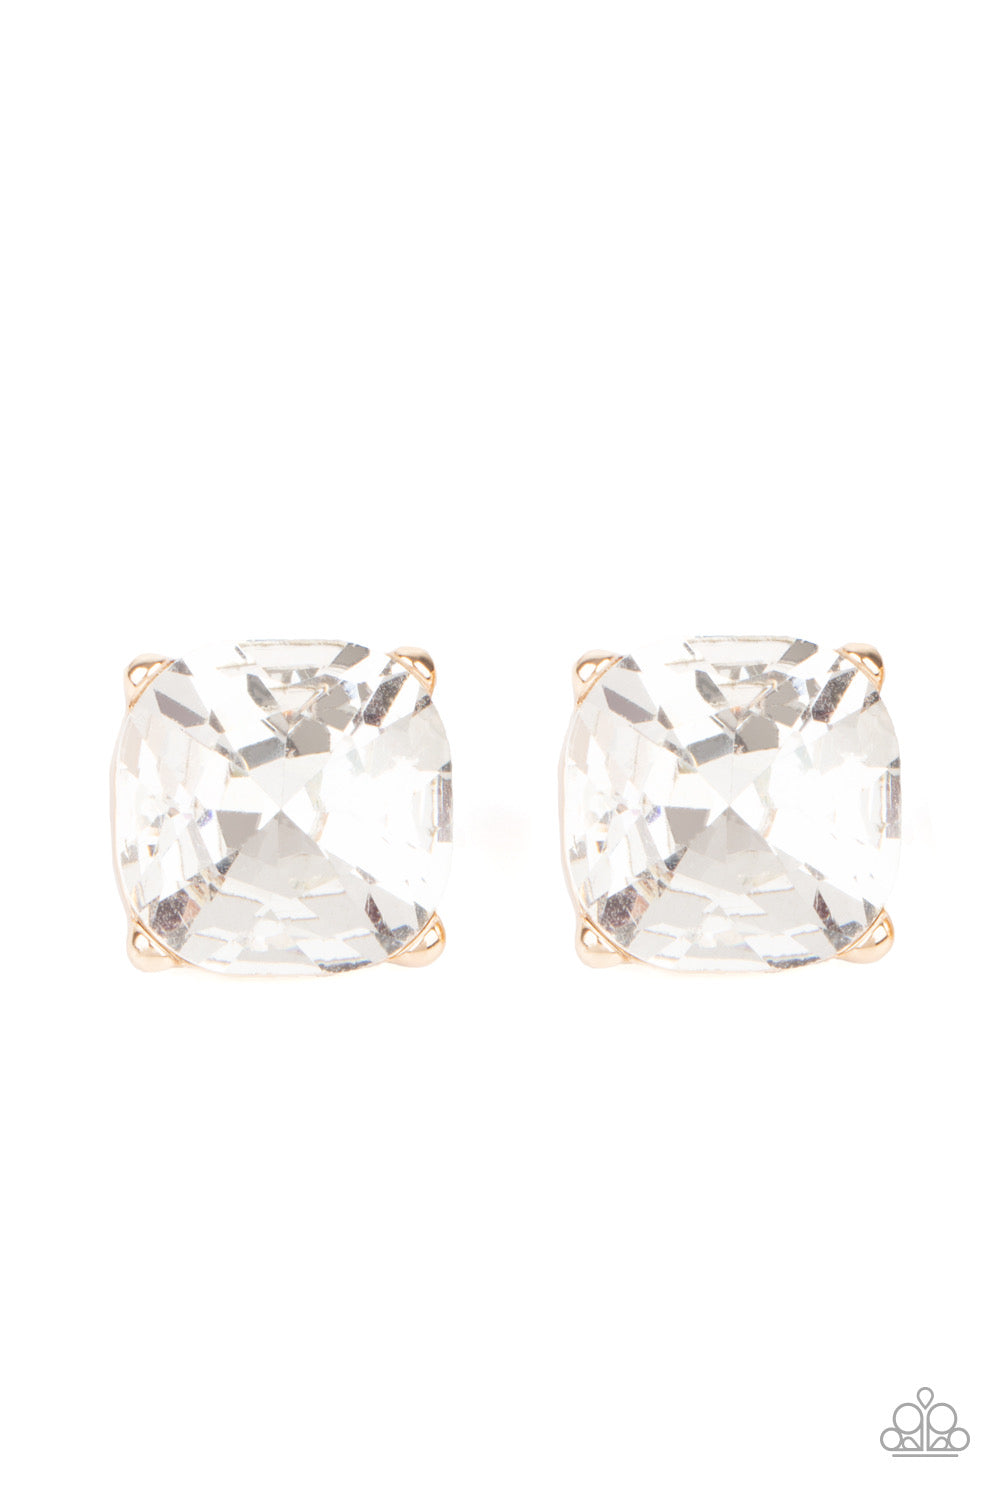 Paparazzi Royalty High - Gold Post Earrings